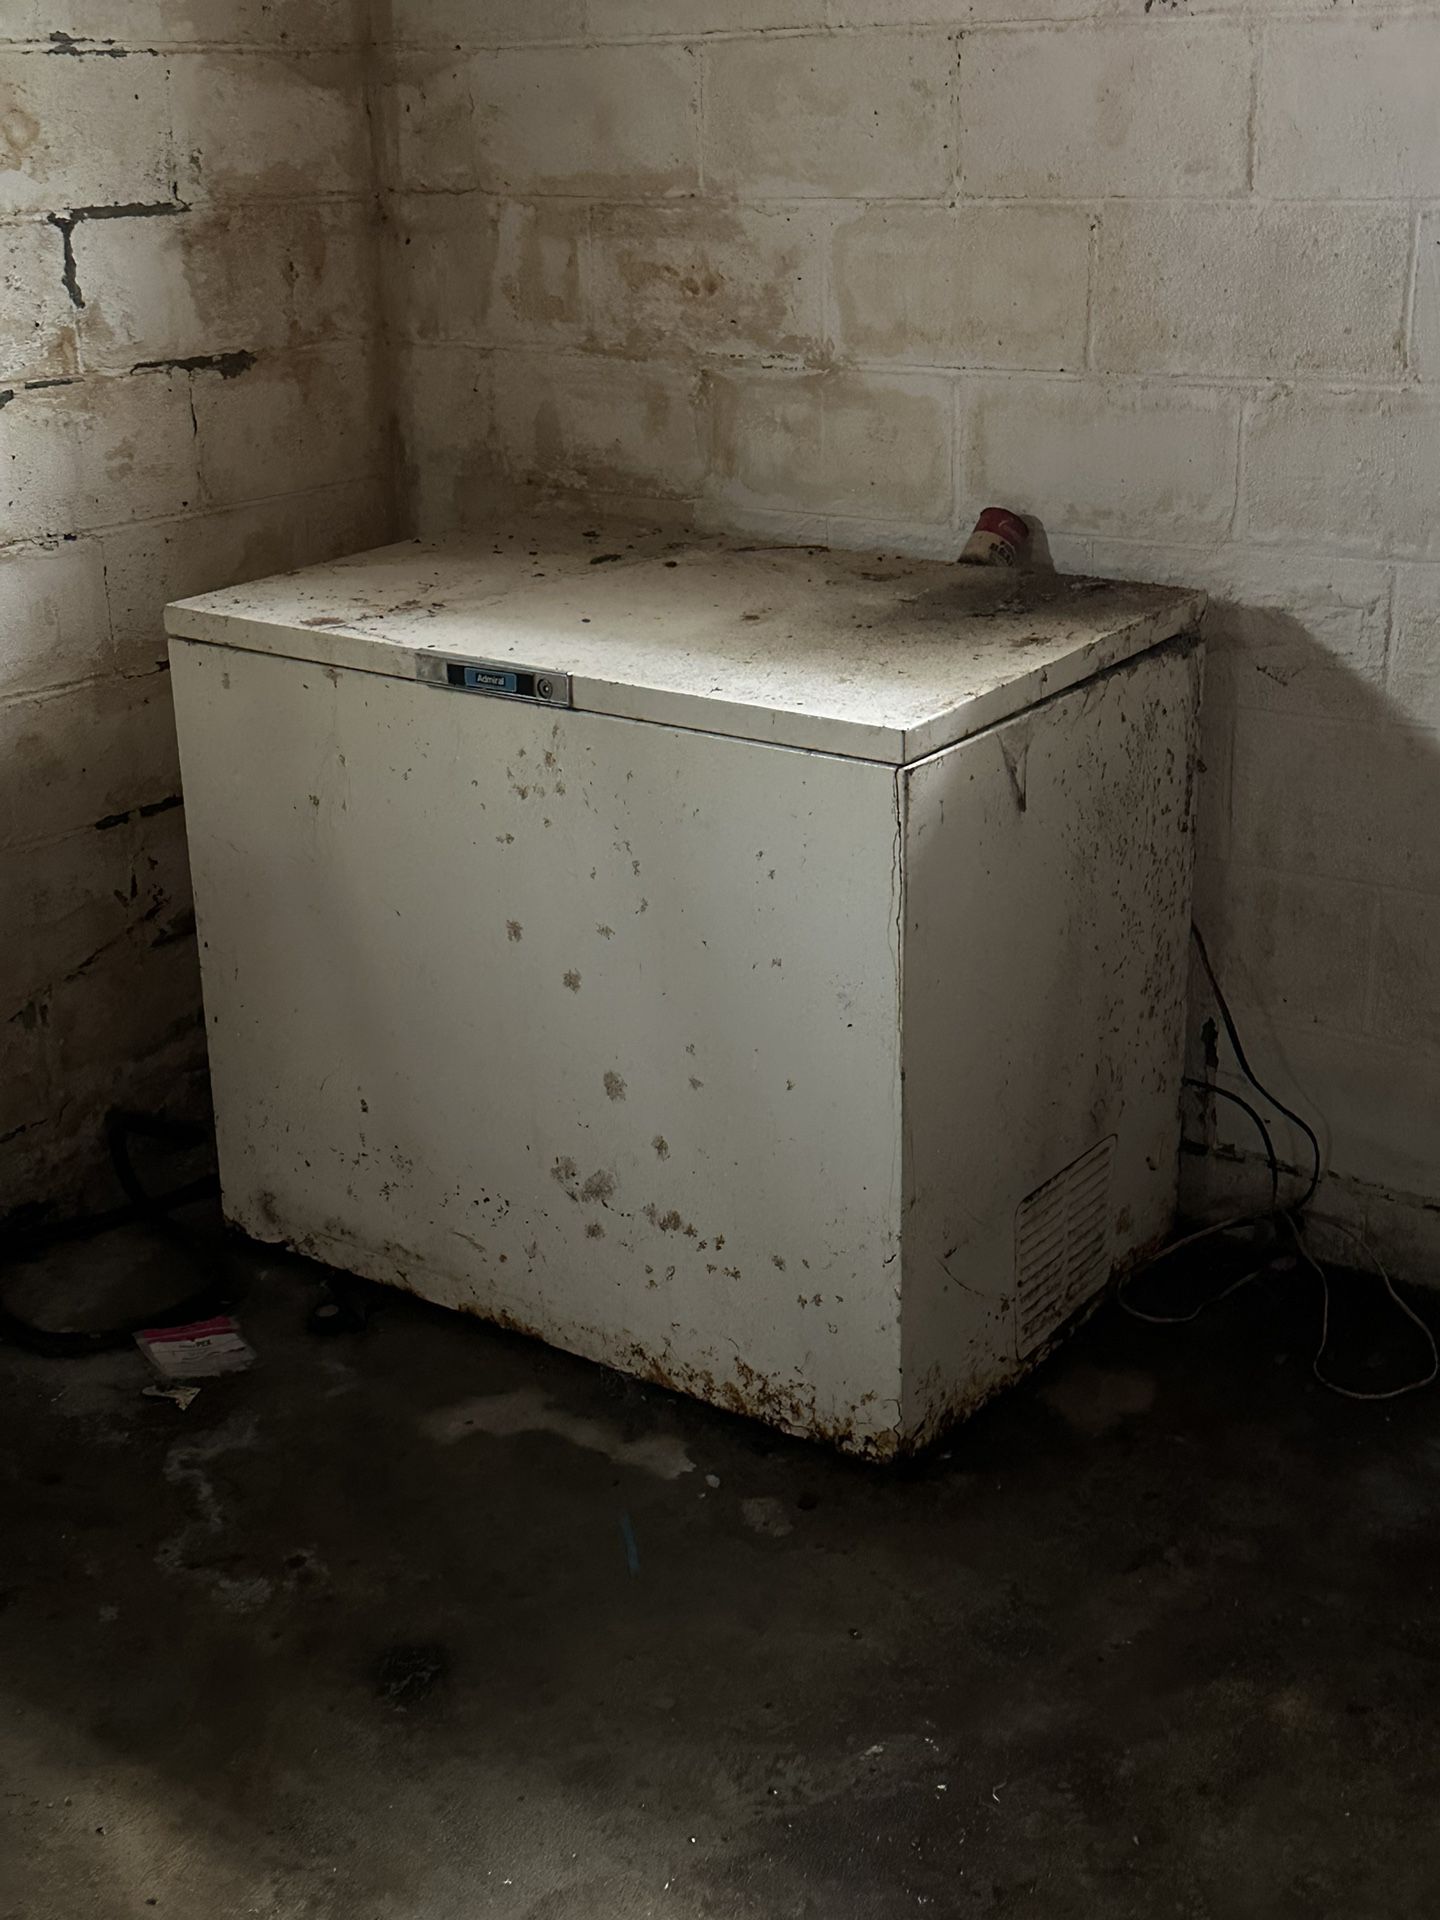 deep freezer and old arcade game for scrapping 